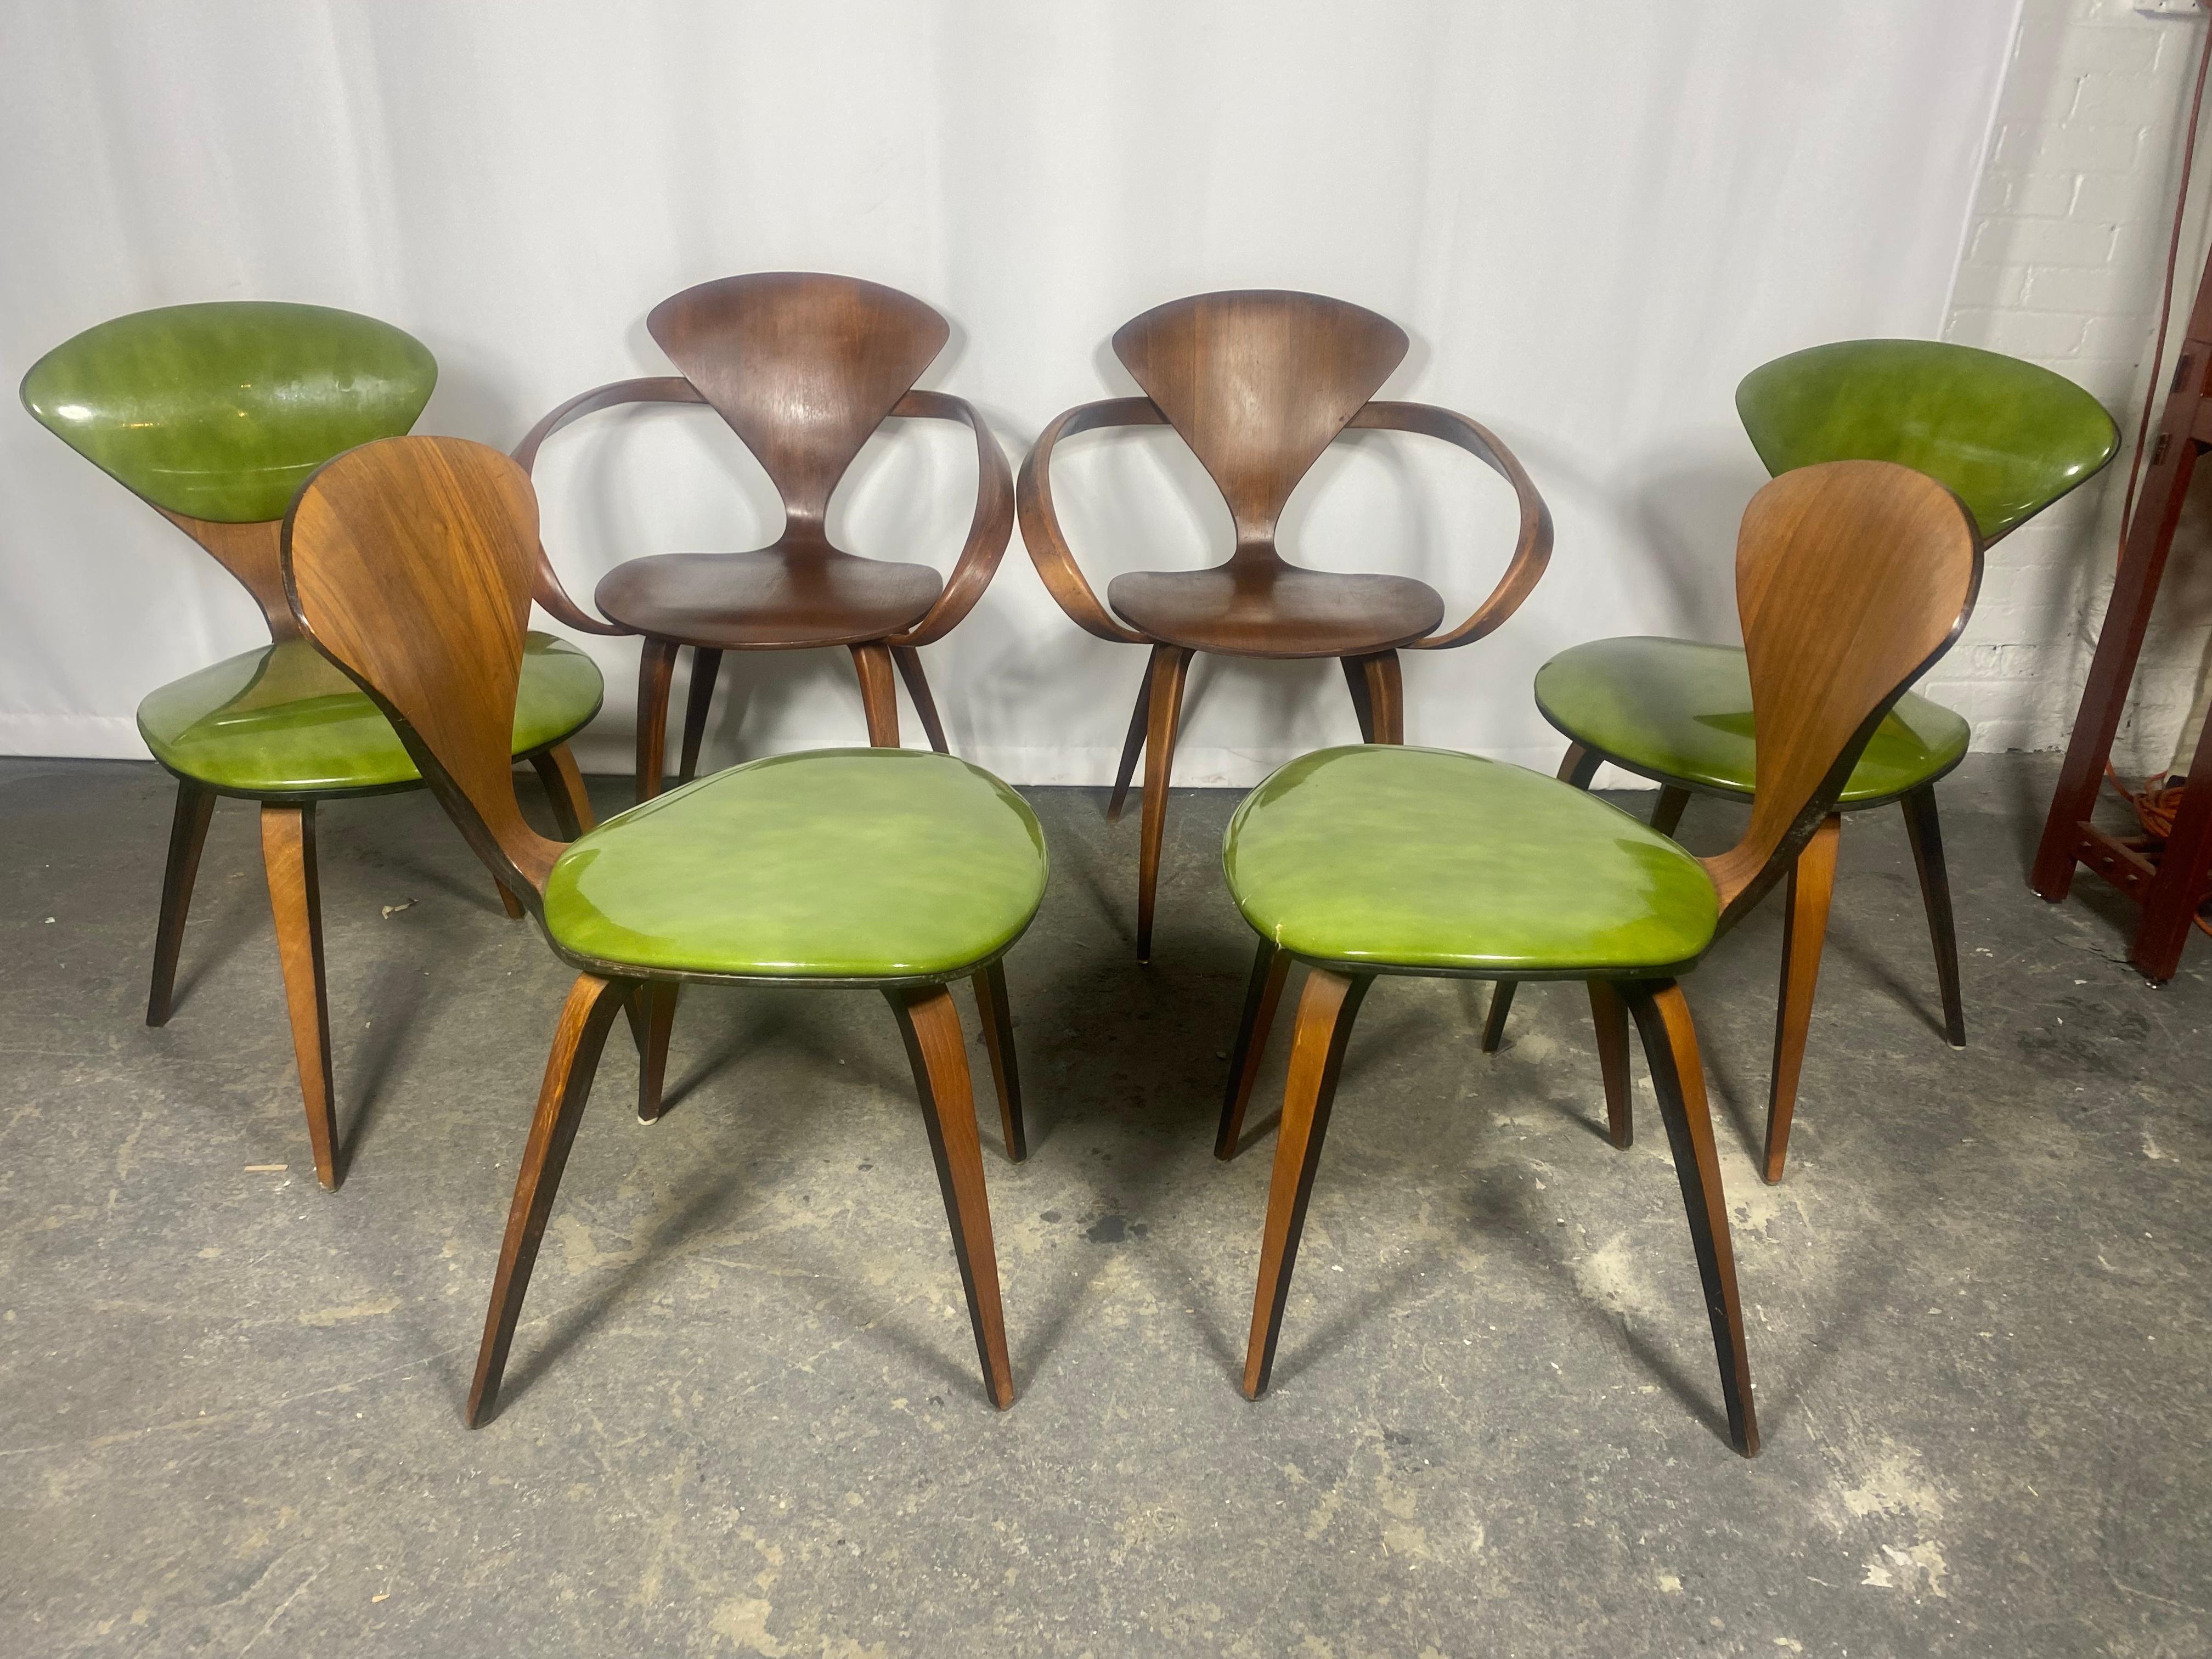 A set of six original Norman Cherner dining chairs, made by Plycraft, USA in the 1960s. Bentwood frames, original patent leatherl seats / backs  Plycraft labels to the undersides. This original set includes 2 Classic Pretzel arm chairs and 4 side